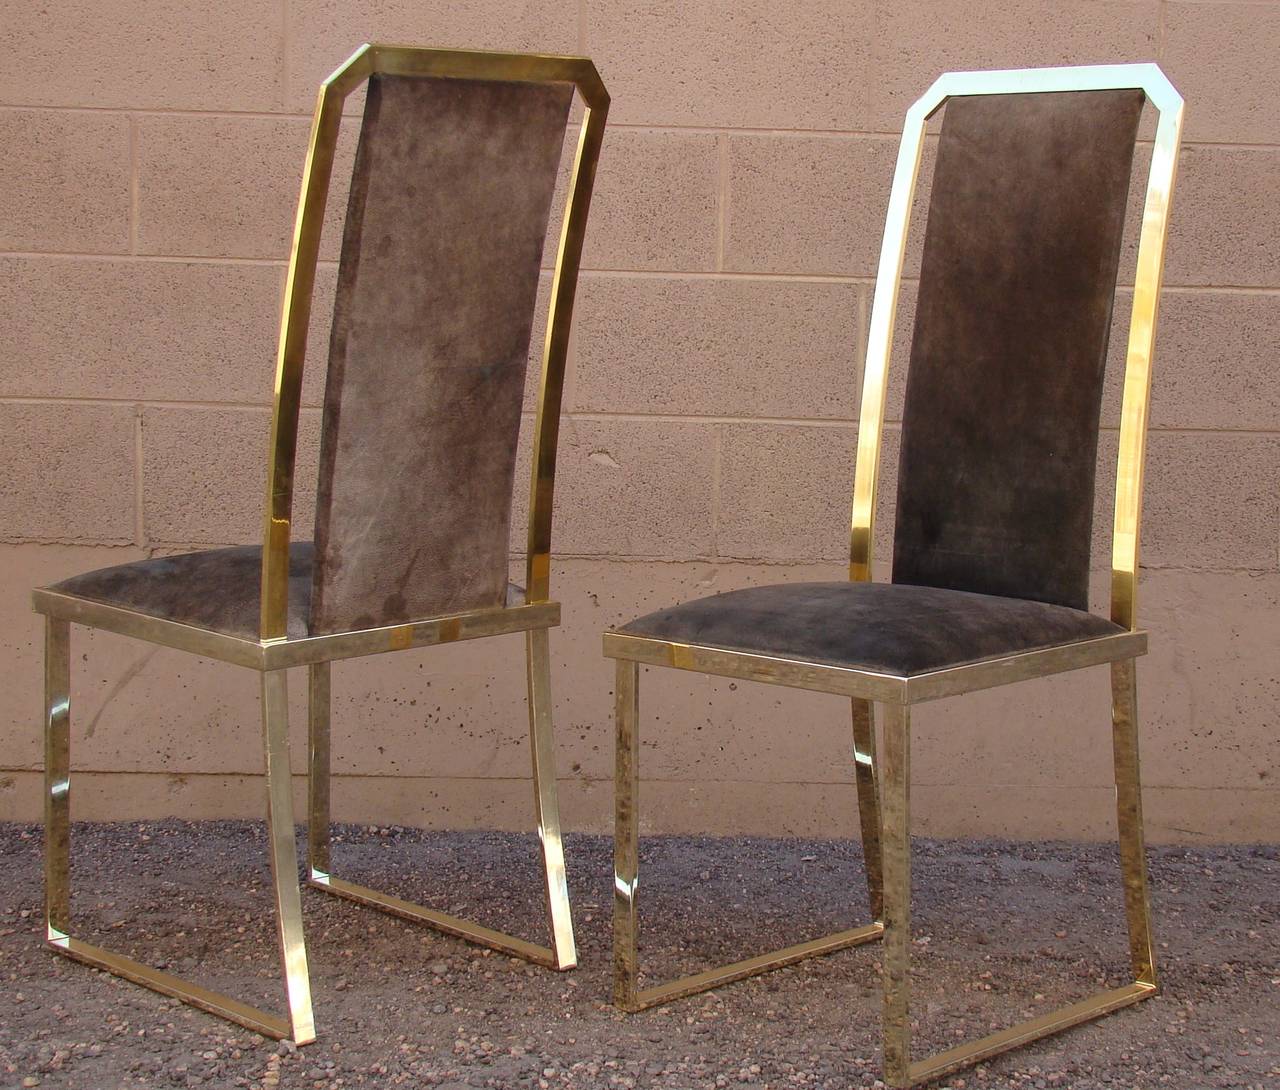 Stunning set of six high back brass dining or side chairs. These chairs are a polished gold tone chrome steel with split cowhide upholstered seats. These were purchased from Roche Bobois in the 1980s and came from the original owners.